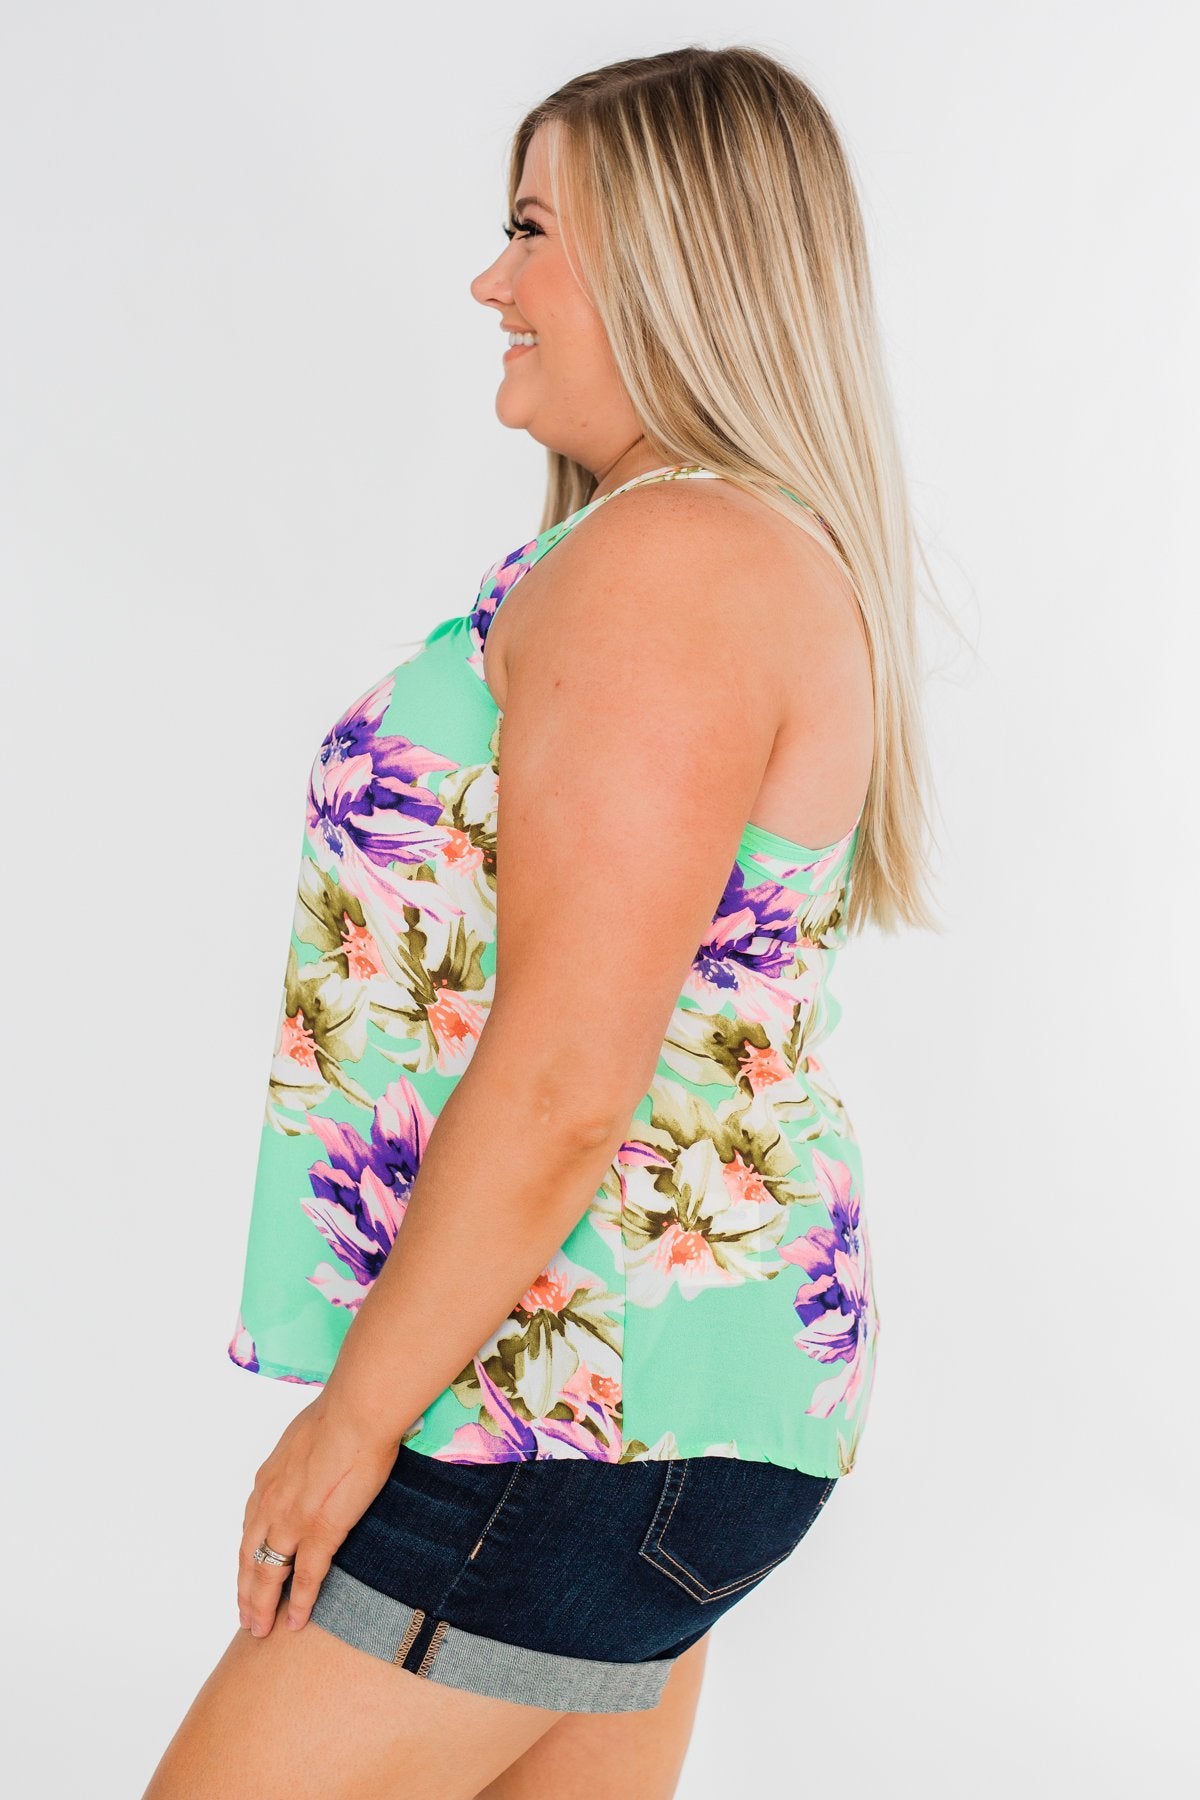 Another Day in Paradise Floral Tank Top- Bright Mint